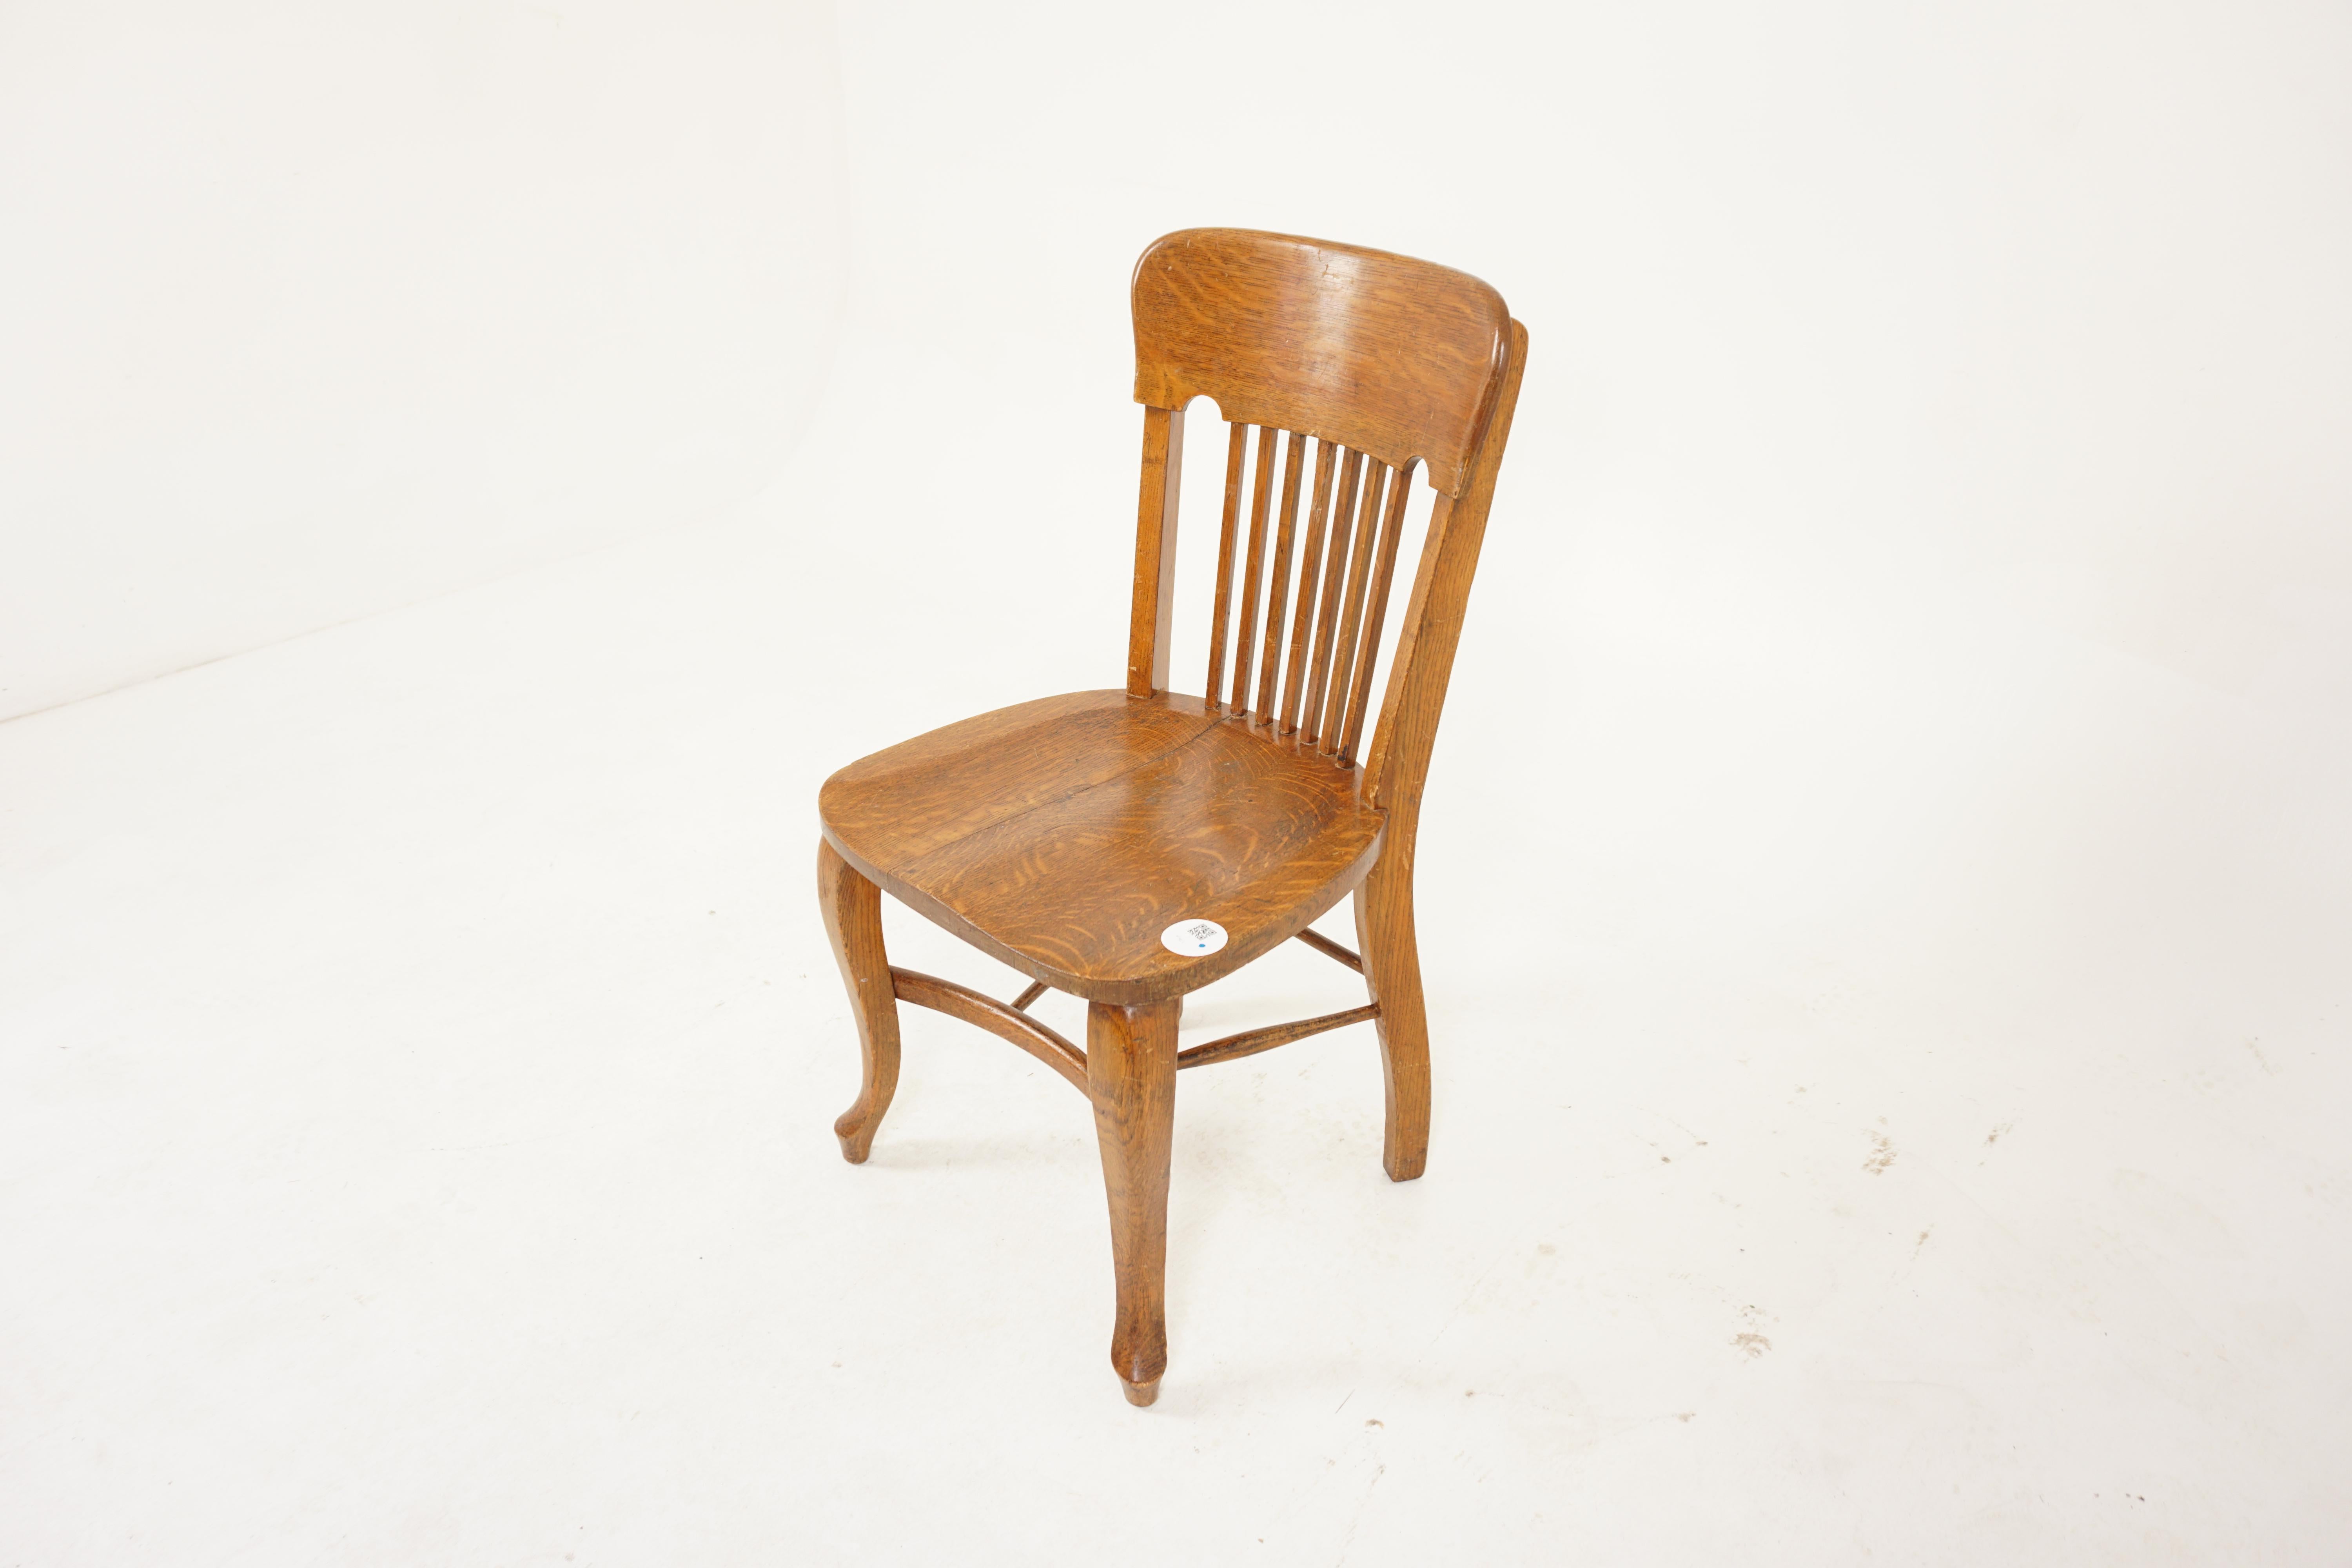 Vintage Tiger Oak office chair, American 1920, H921

American 1920
Solid oak
Original finish
Carved top rail
Seven vertical slats below
Solid Tiger oak saddle seat
All standing on shaped cabriole front legs
Connected by turn stretchers